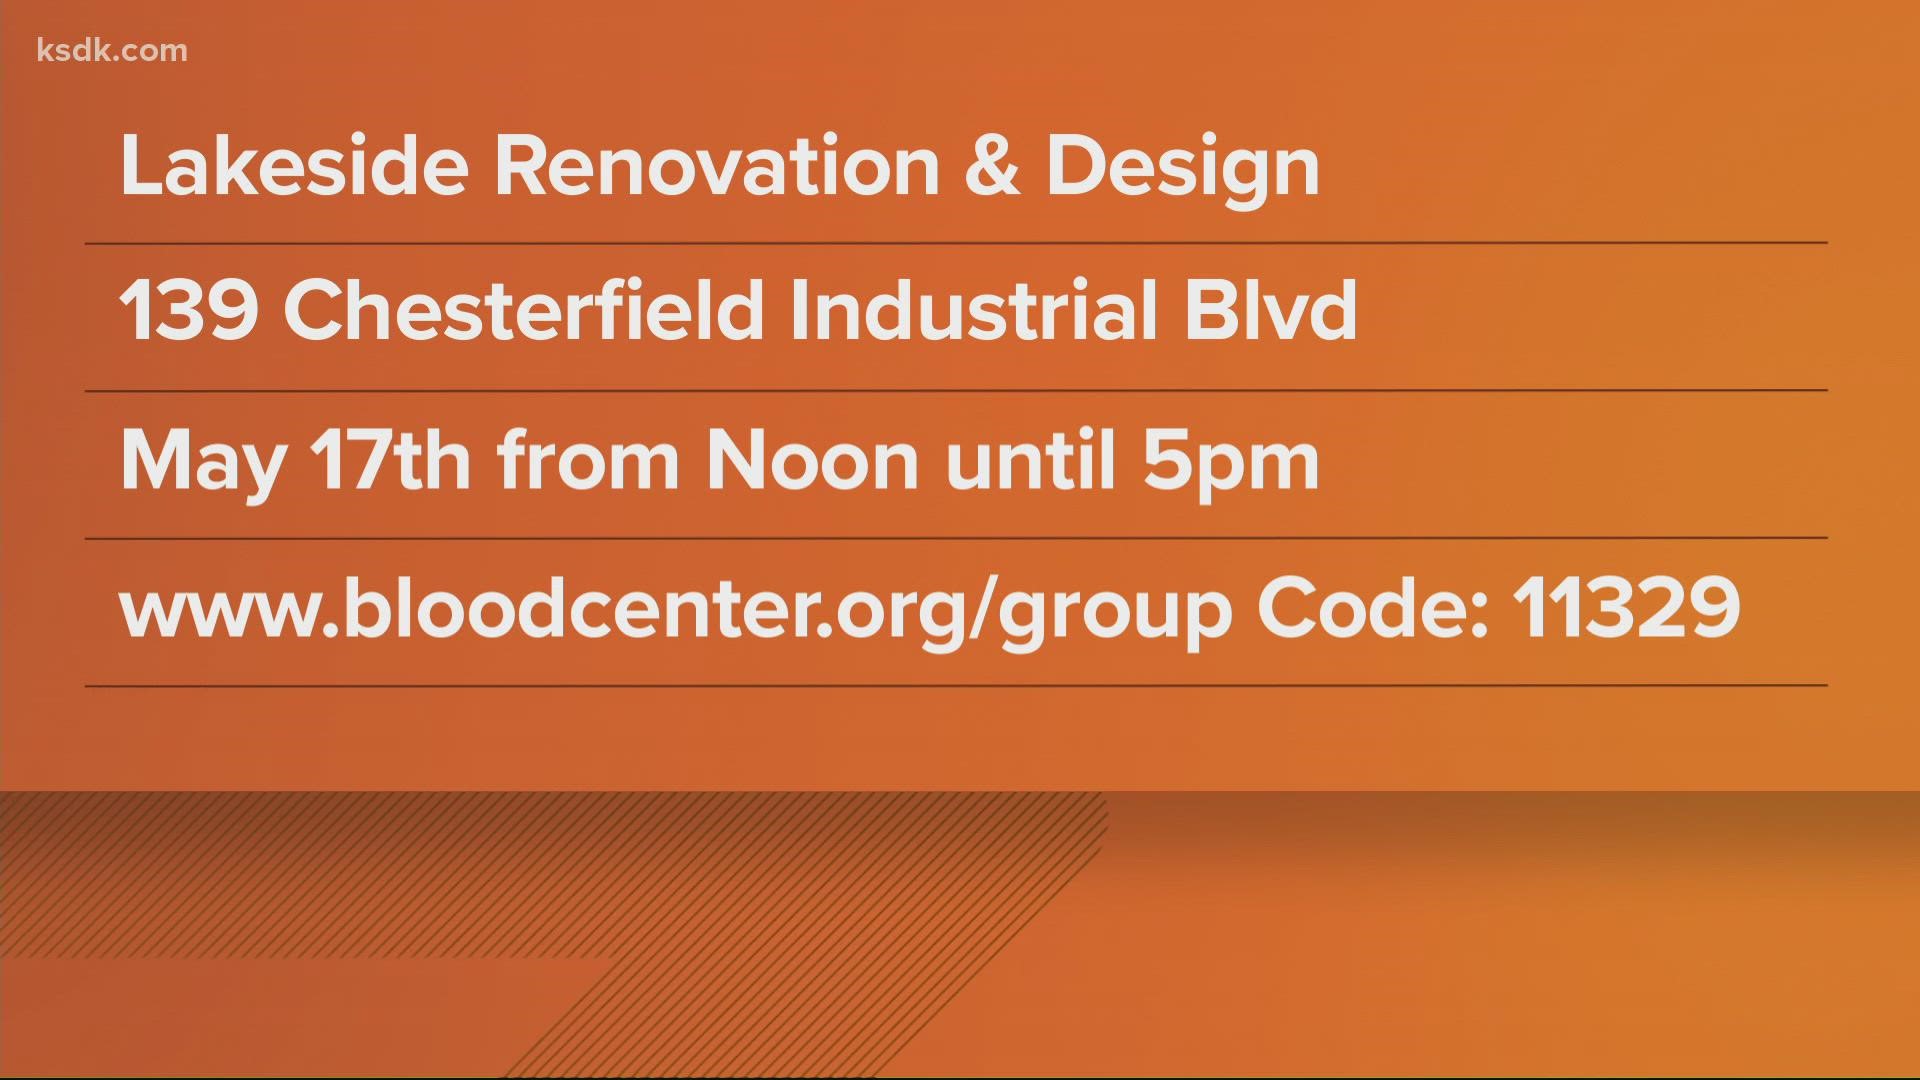 It will be held May 17 from noon to 5 p.m. at Lakeside Renovation and Design's office in Chesterfield. Appointments are required.